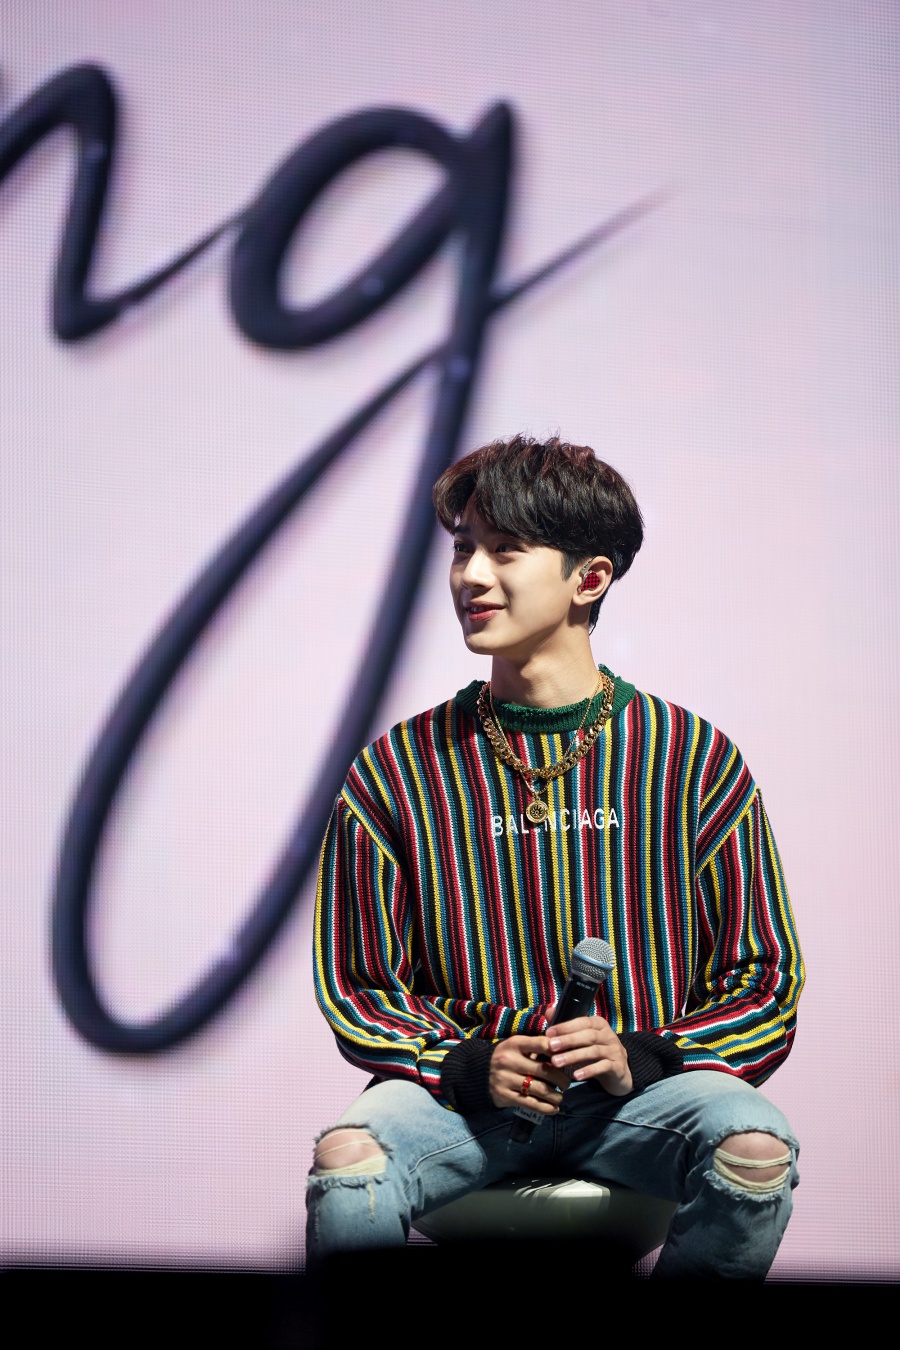 Lai Kuan-lin successfully completed the first solo fan meeting in Korea.Lai Kuan-lin from the group Wanna One held the first solo fan meeting 2019 Lai Kuan-lin fan meeting Good Filling in Korea at the Olympic Park Olympic Hall in Seoul,Lai Kuan-lin, who made the opening stage with his charismatic solo song High Pay, gave his fans his first greeting, saying, Its been too long, I missed you.Today is a new beginning, I will work hard not to disappoint you who are starting a new beginning.Lai Kuan-lin talked closely with fans through the Lai Kuan-lins Four Cuts corner, which recalls recent trends and past, and the Do Everything corner, which counsels the fans stories directly.In particular, Park Jihoon, who worked with Wanna One, and Selfa taken in Osaka, were released. In the Wanna One activity, Park Jihoon and Park Jihoon and an anecdote on a kickboard for three hours to go to Cheongdam-dong, I got a smile.In the School City of London Rai corner, the Pentagons Wooseok, who worked together as a unit activity, appeared as a guest and played various games such as body dance, quiz hit, basketball shot showdown, and enjoyed the fans with their limited express chemistry.Lai Kuan-lin has received a lot of fans attention by offering a variety of stages including Ed Sheerans Shape City of London You, MGKs Let You Go, Wooseok X Guerins mini 1st title song Starge and solo song Good Filling.I am grateful for being around for a moment, the fans said in a surprise video.I am really grateful that I can share so many memories in three years, said Lai Kuan-lin, who expressed his sincere heart, I think it is more realistic to start communicating with fans like this.I will continue to show you a better picture, so I would like to ask for your love and interest. After the fan meeting, Lai Kuan-lin had a time to see the fans off while high-fived with all the audience, and turned on the V-live to make the fan meeting that ended in the first round.As a result, the successful Lai Kuan-lin fan meeting was nicknamed Hyeja fan meeting among fans.Lai Kuan-lin, who has successfully completed the Seoul fan meeting to open the Asian fan meeting tour, will continue to open in Bangkok on the 20th.